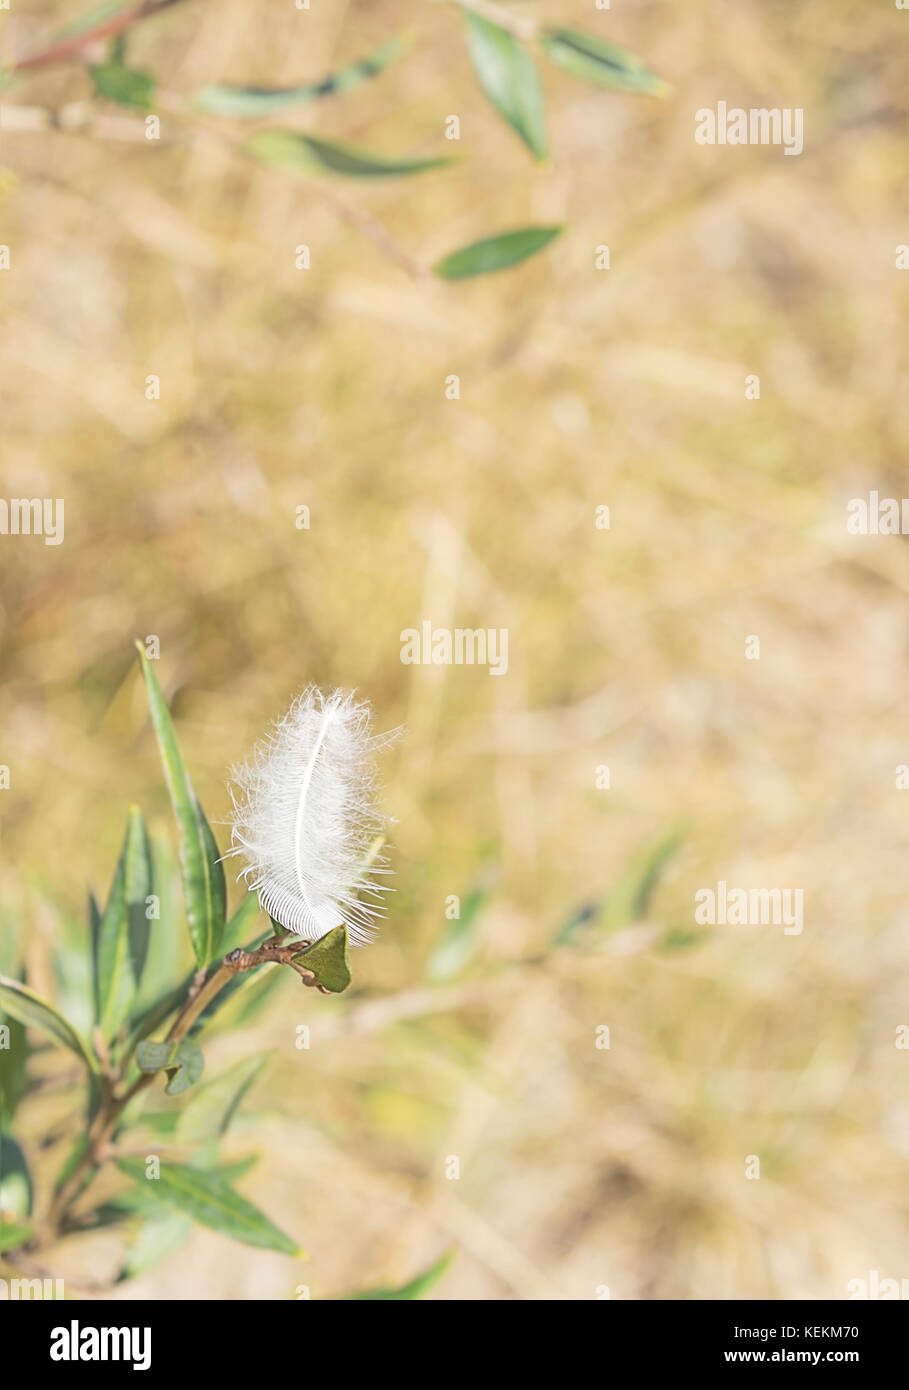 White downy peaceful fluffy feather in a light breeze concept of freedom, ease, relaxation, carefree or condolence background Stock Photo